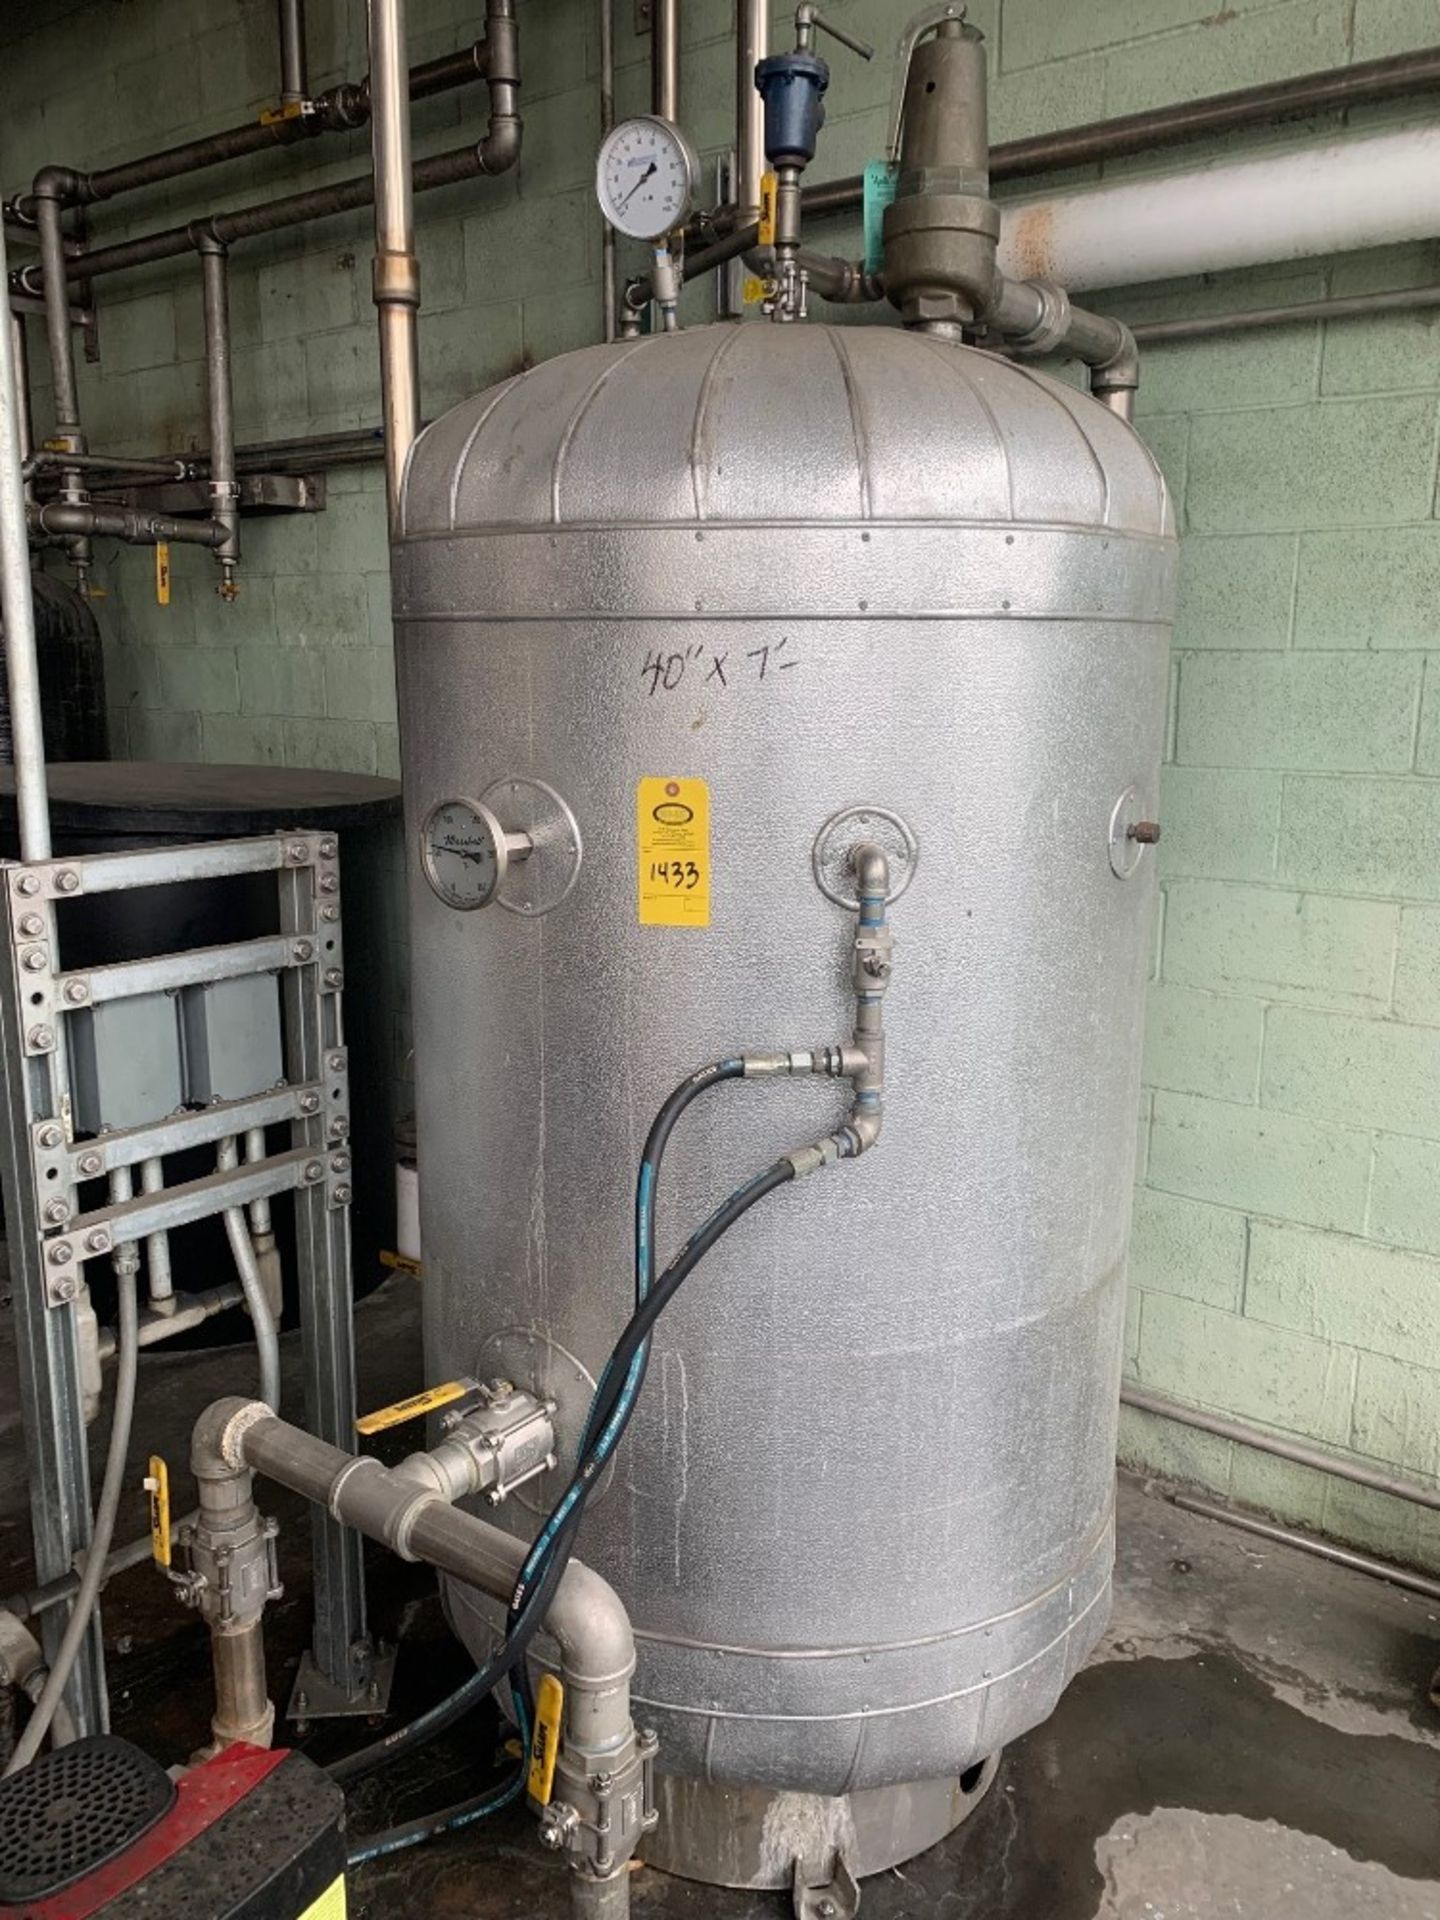 Insulated Stainless Steel Tank for high pressure, hot water, 40" Dia. X 7' Tall with (2) Grundfos